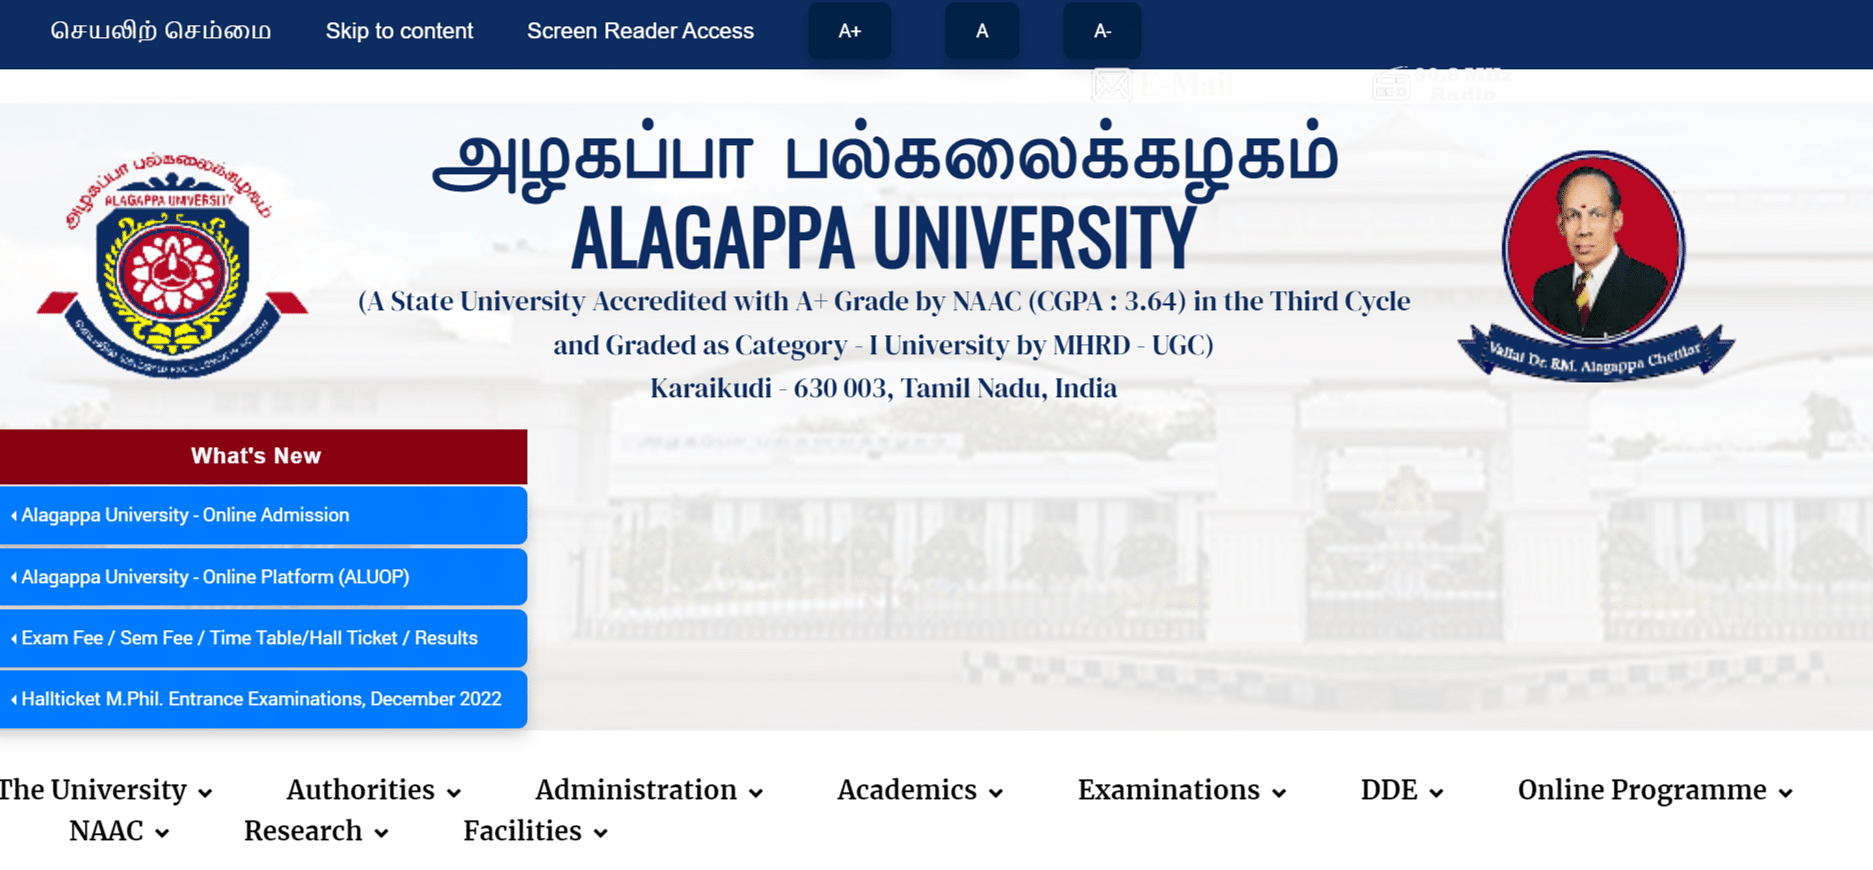 I Don't Want To Spend This Much Time On alagappa university. How About You?